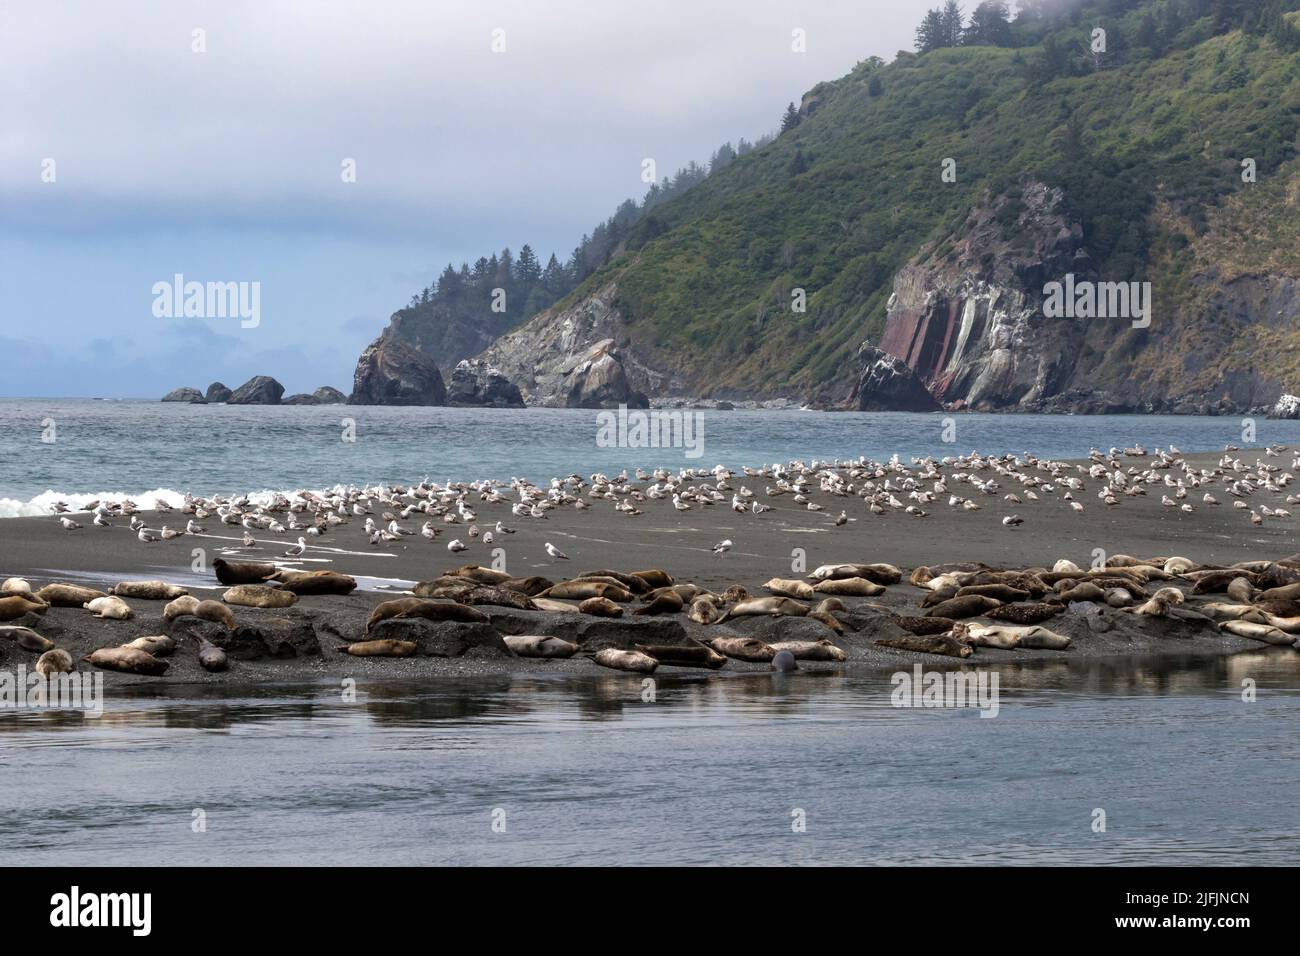 Seals and seagulls share the sandbar at the mouth of the Klamath River in Northern California. Stock Photo